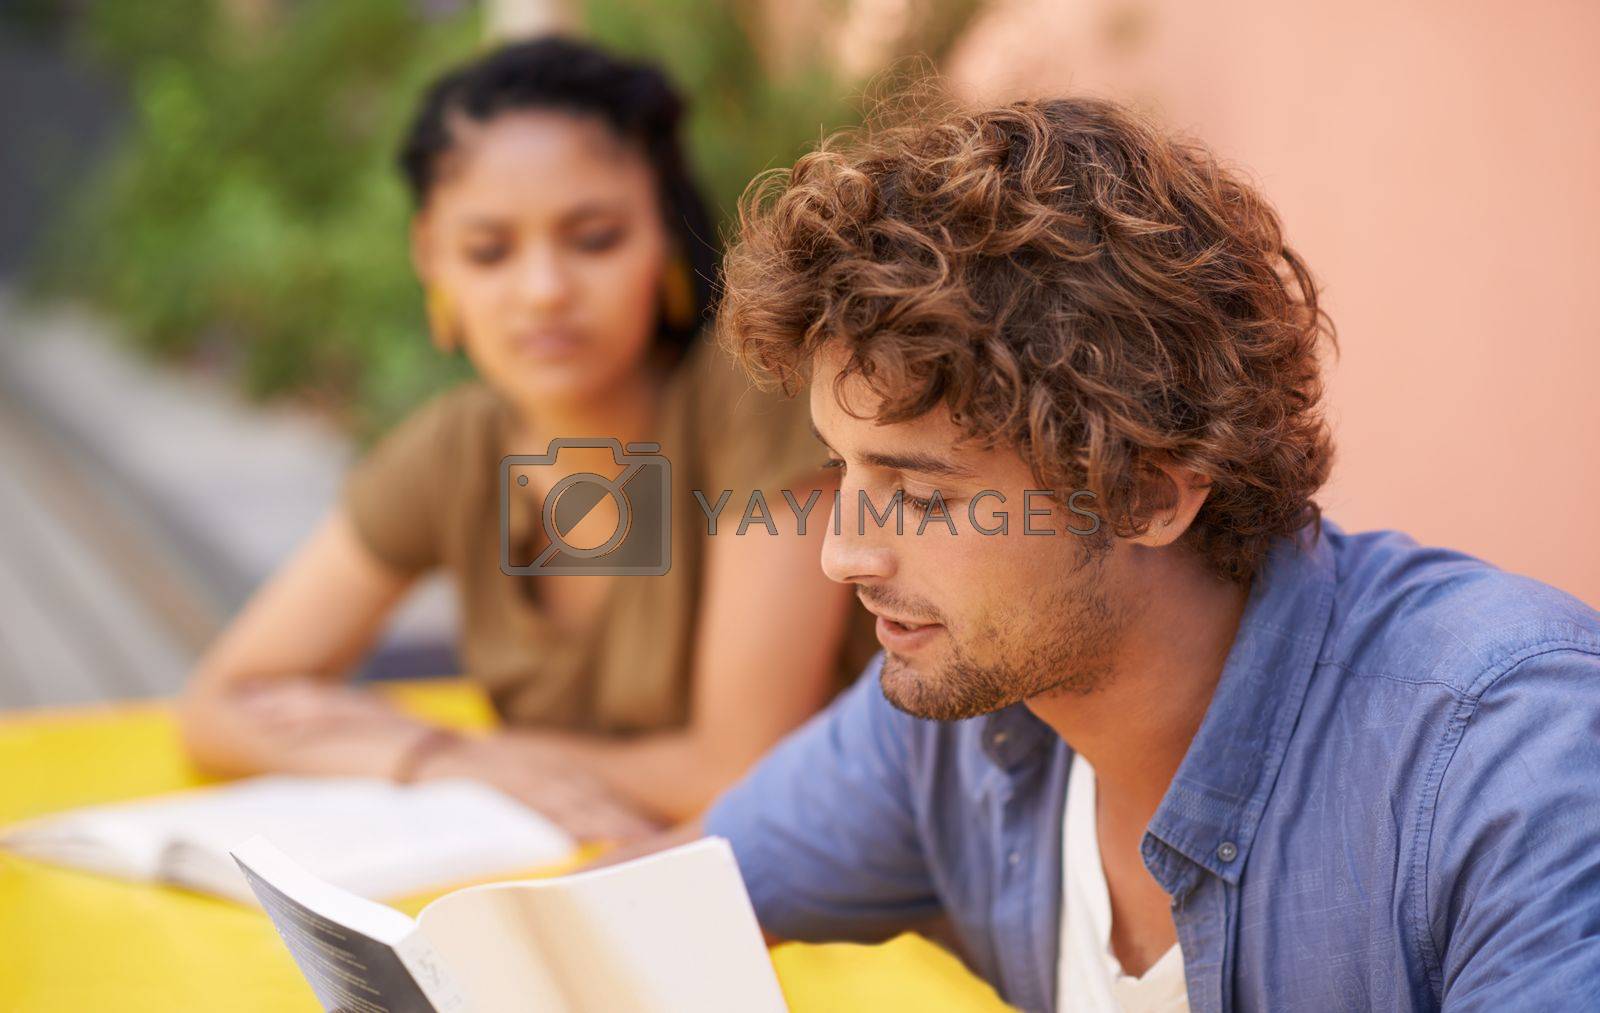 Royalty free image of The fruits of education are sweet. A shot of university students sitting outdoors with reading material. by YuriArcurs